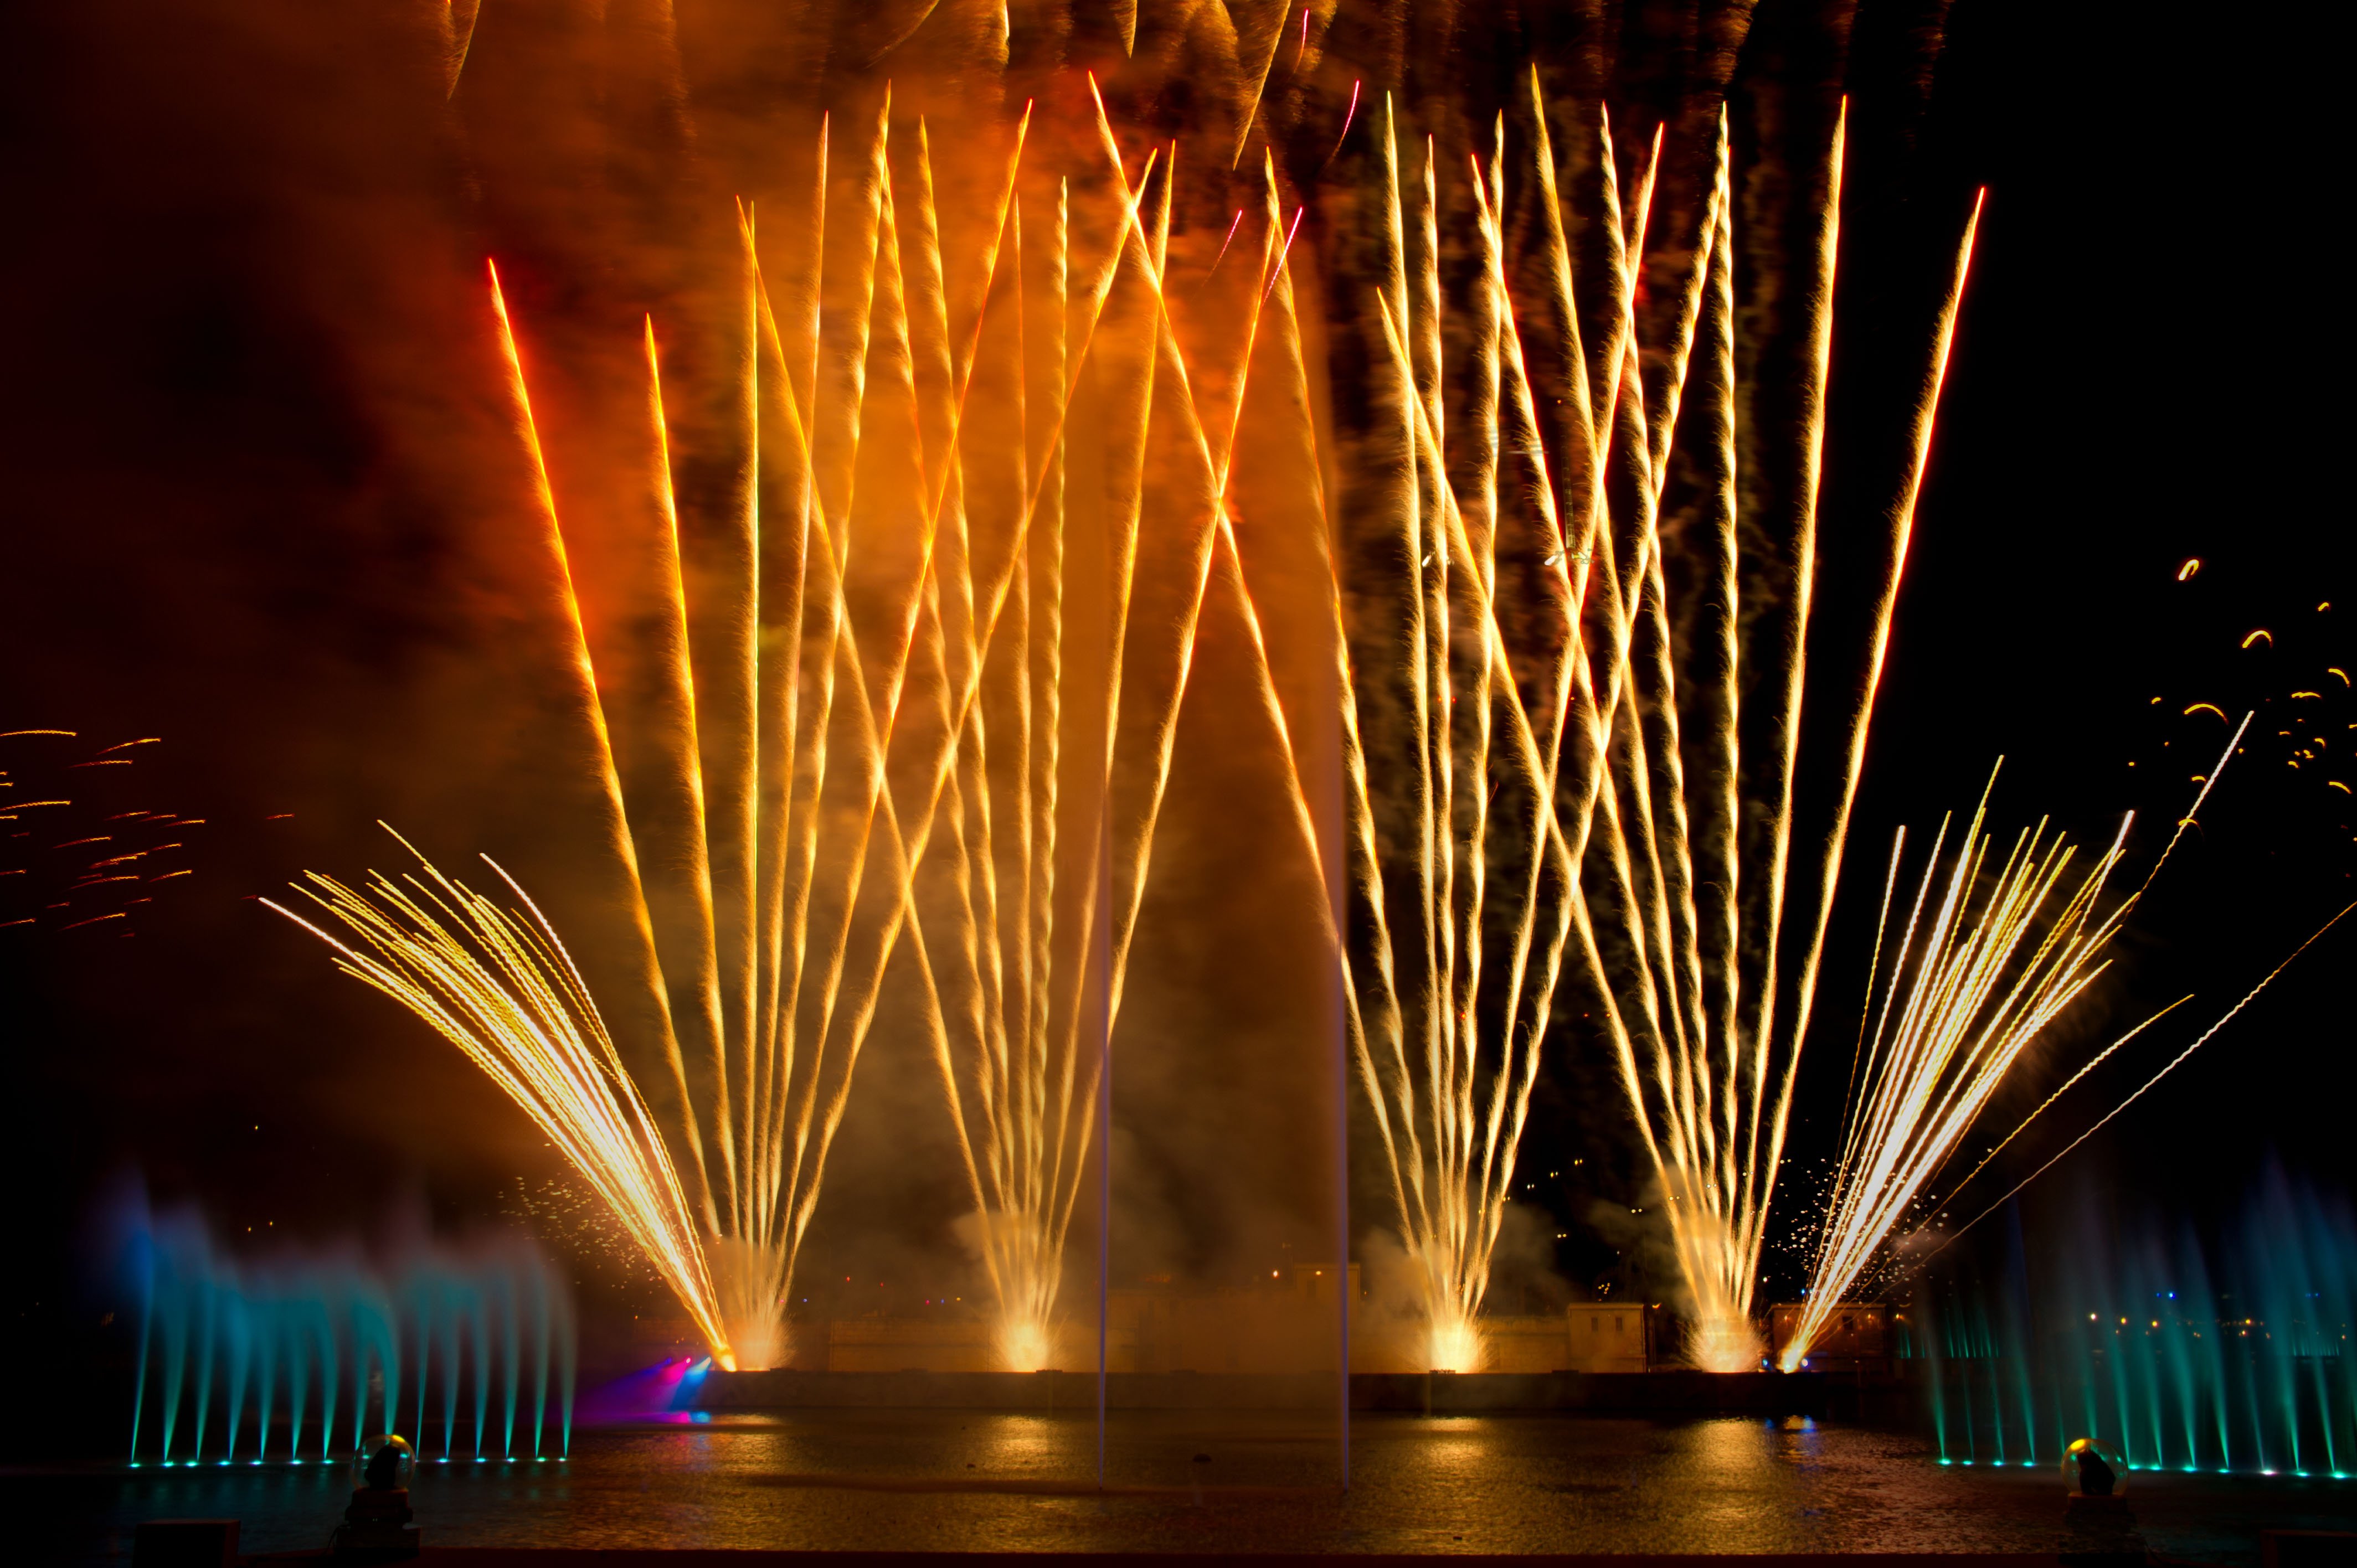 The fireworks shows at SeaWorld are a must see when you visit.